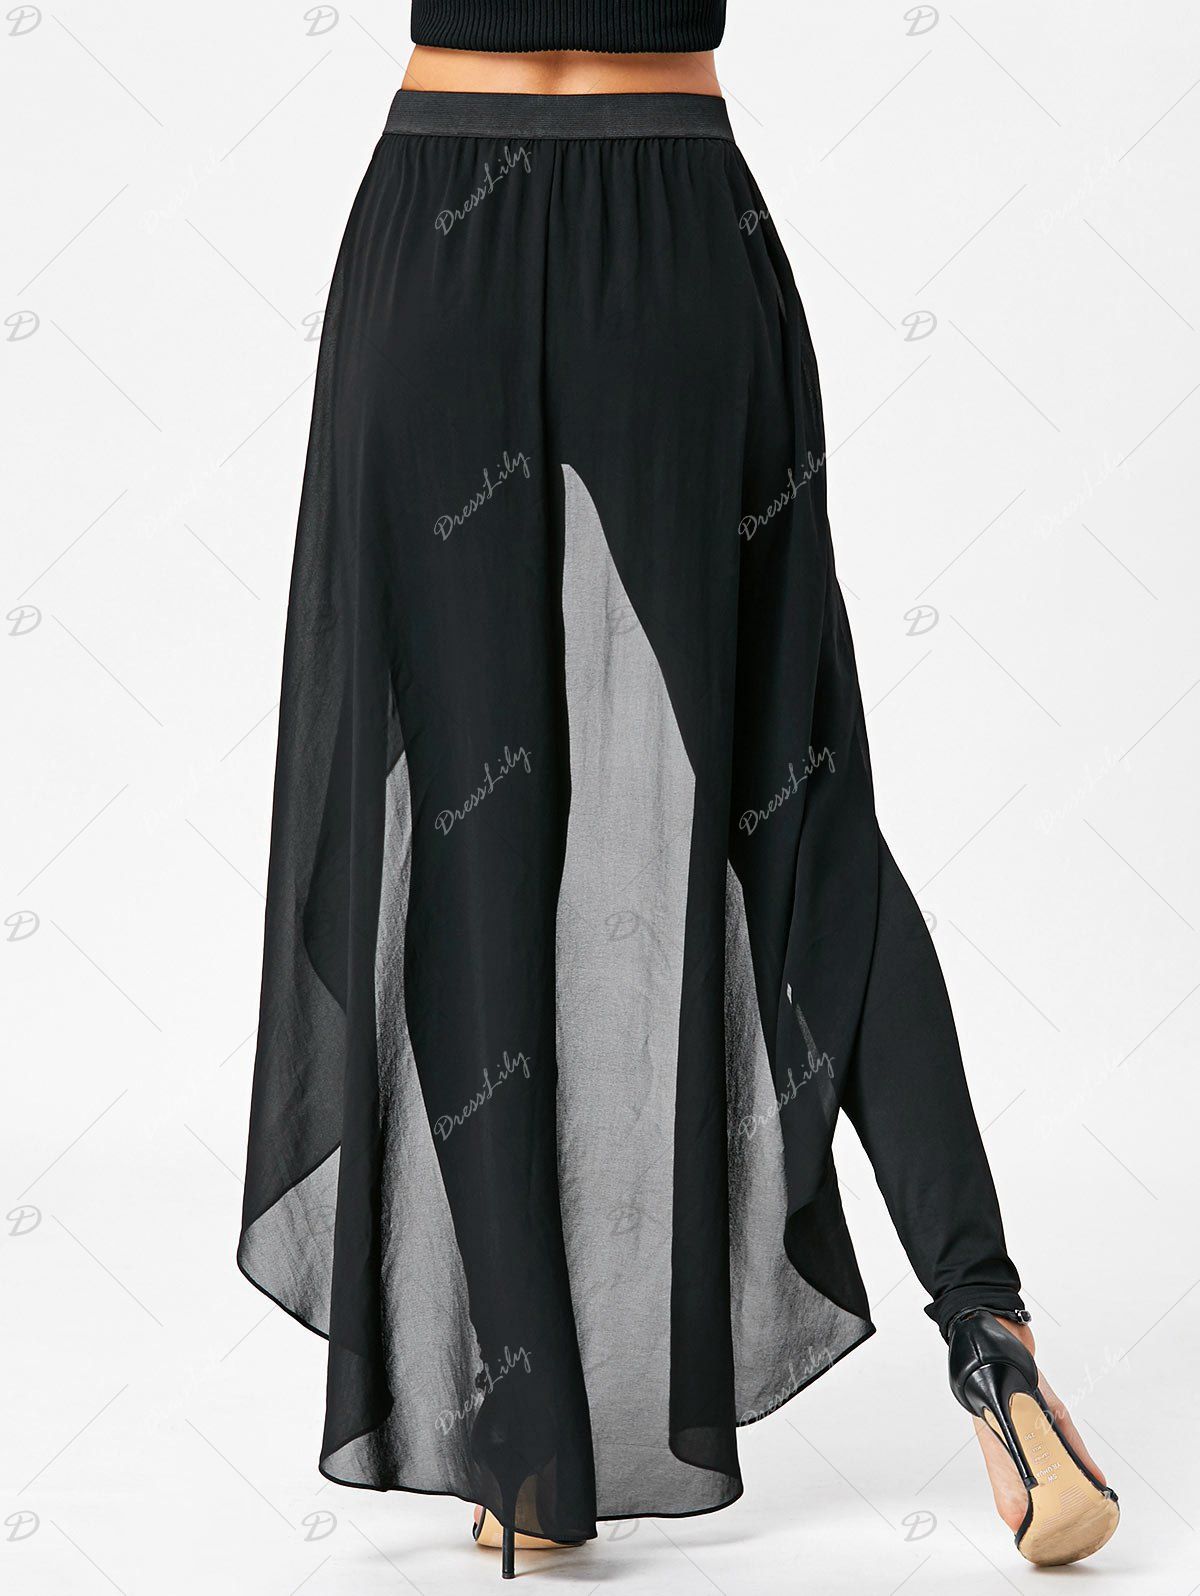 DressLily.com: Photo Gallery - High Waist Slimming Pants with Skirt